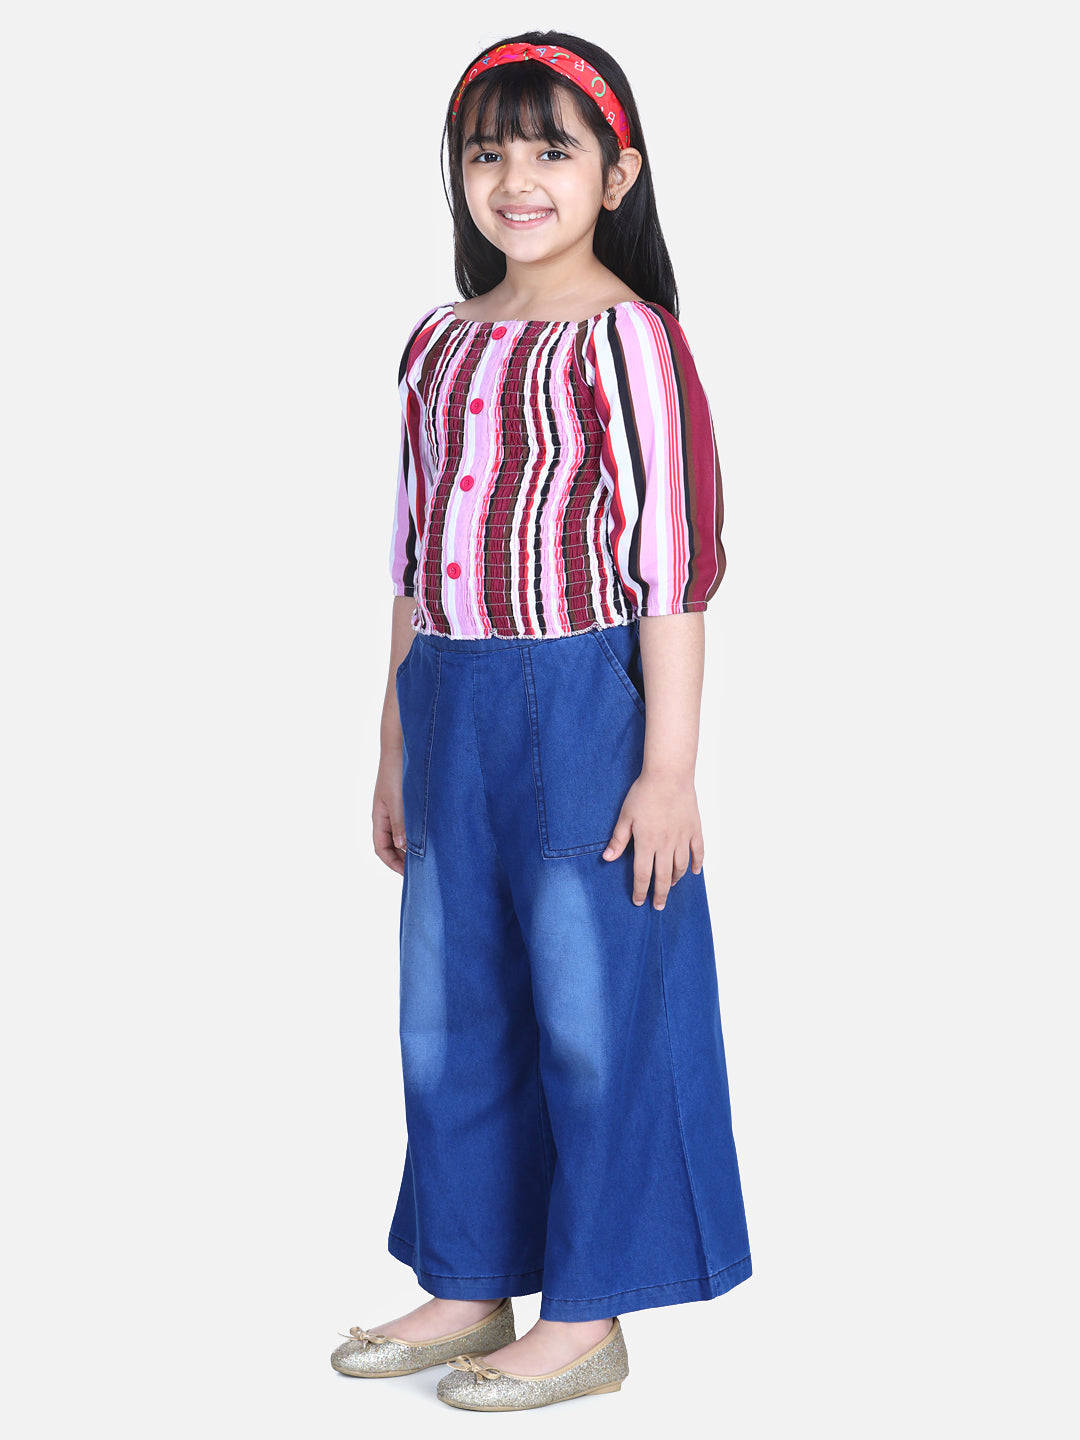 Girls Striped Smocked Top with Denim Culottes